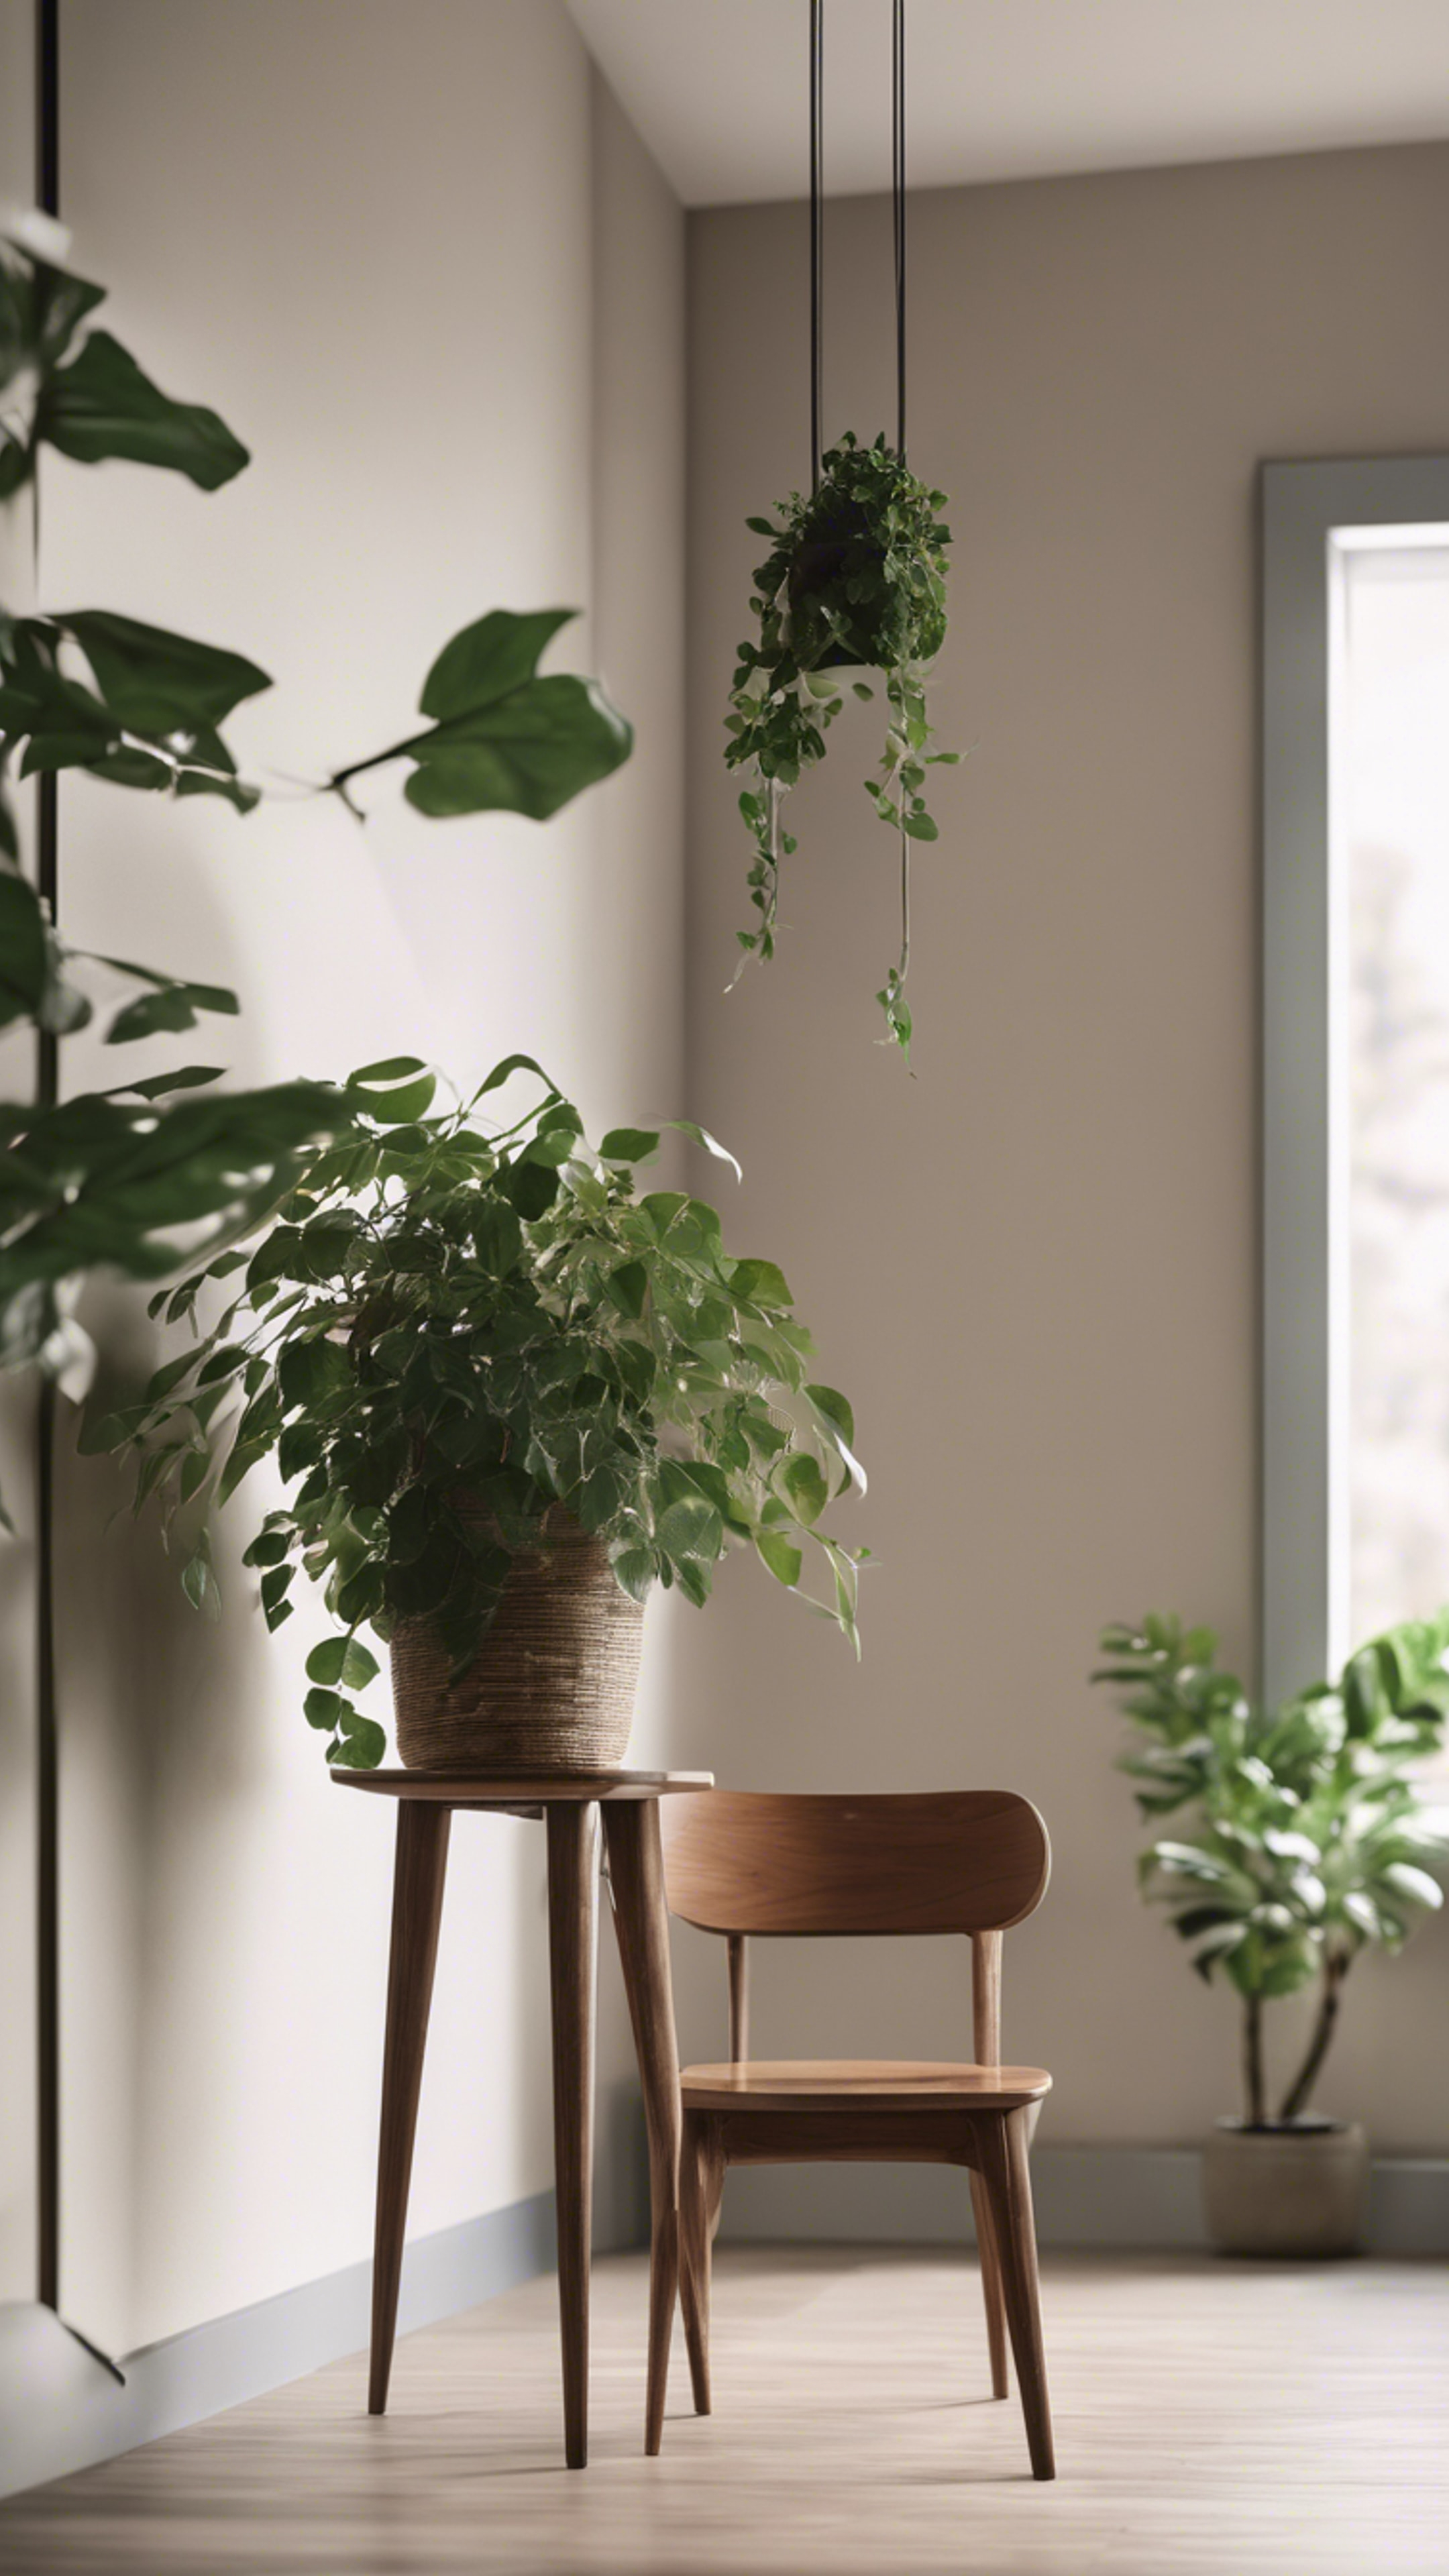 The corner of a minimalist room, featuring a hanging plant and a low, wooden side table. Hintergrund[20a0de2ec9c541069b04]